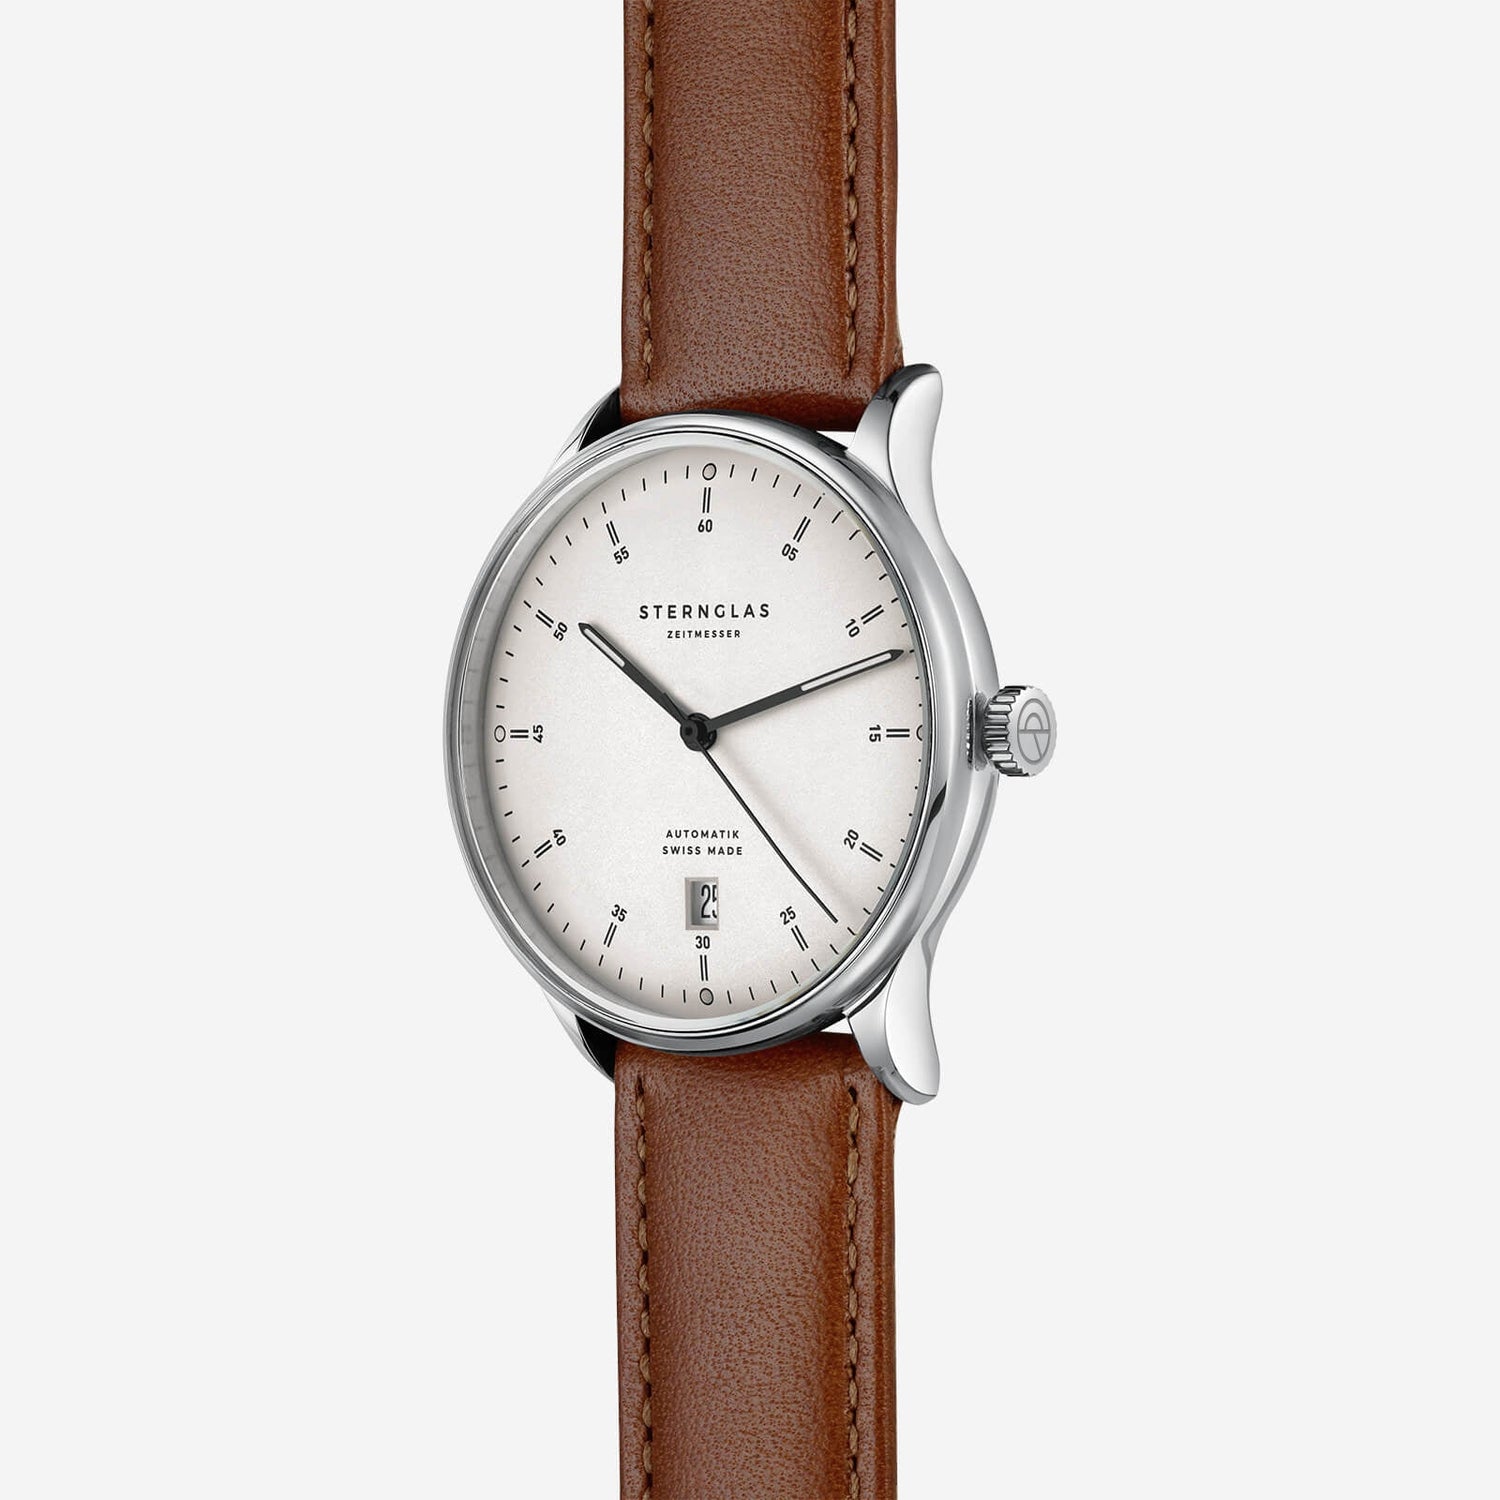 popup|Curved dial|The silvery satin-finished dial with fine curvature gives the model a noble vintage character.